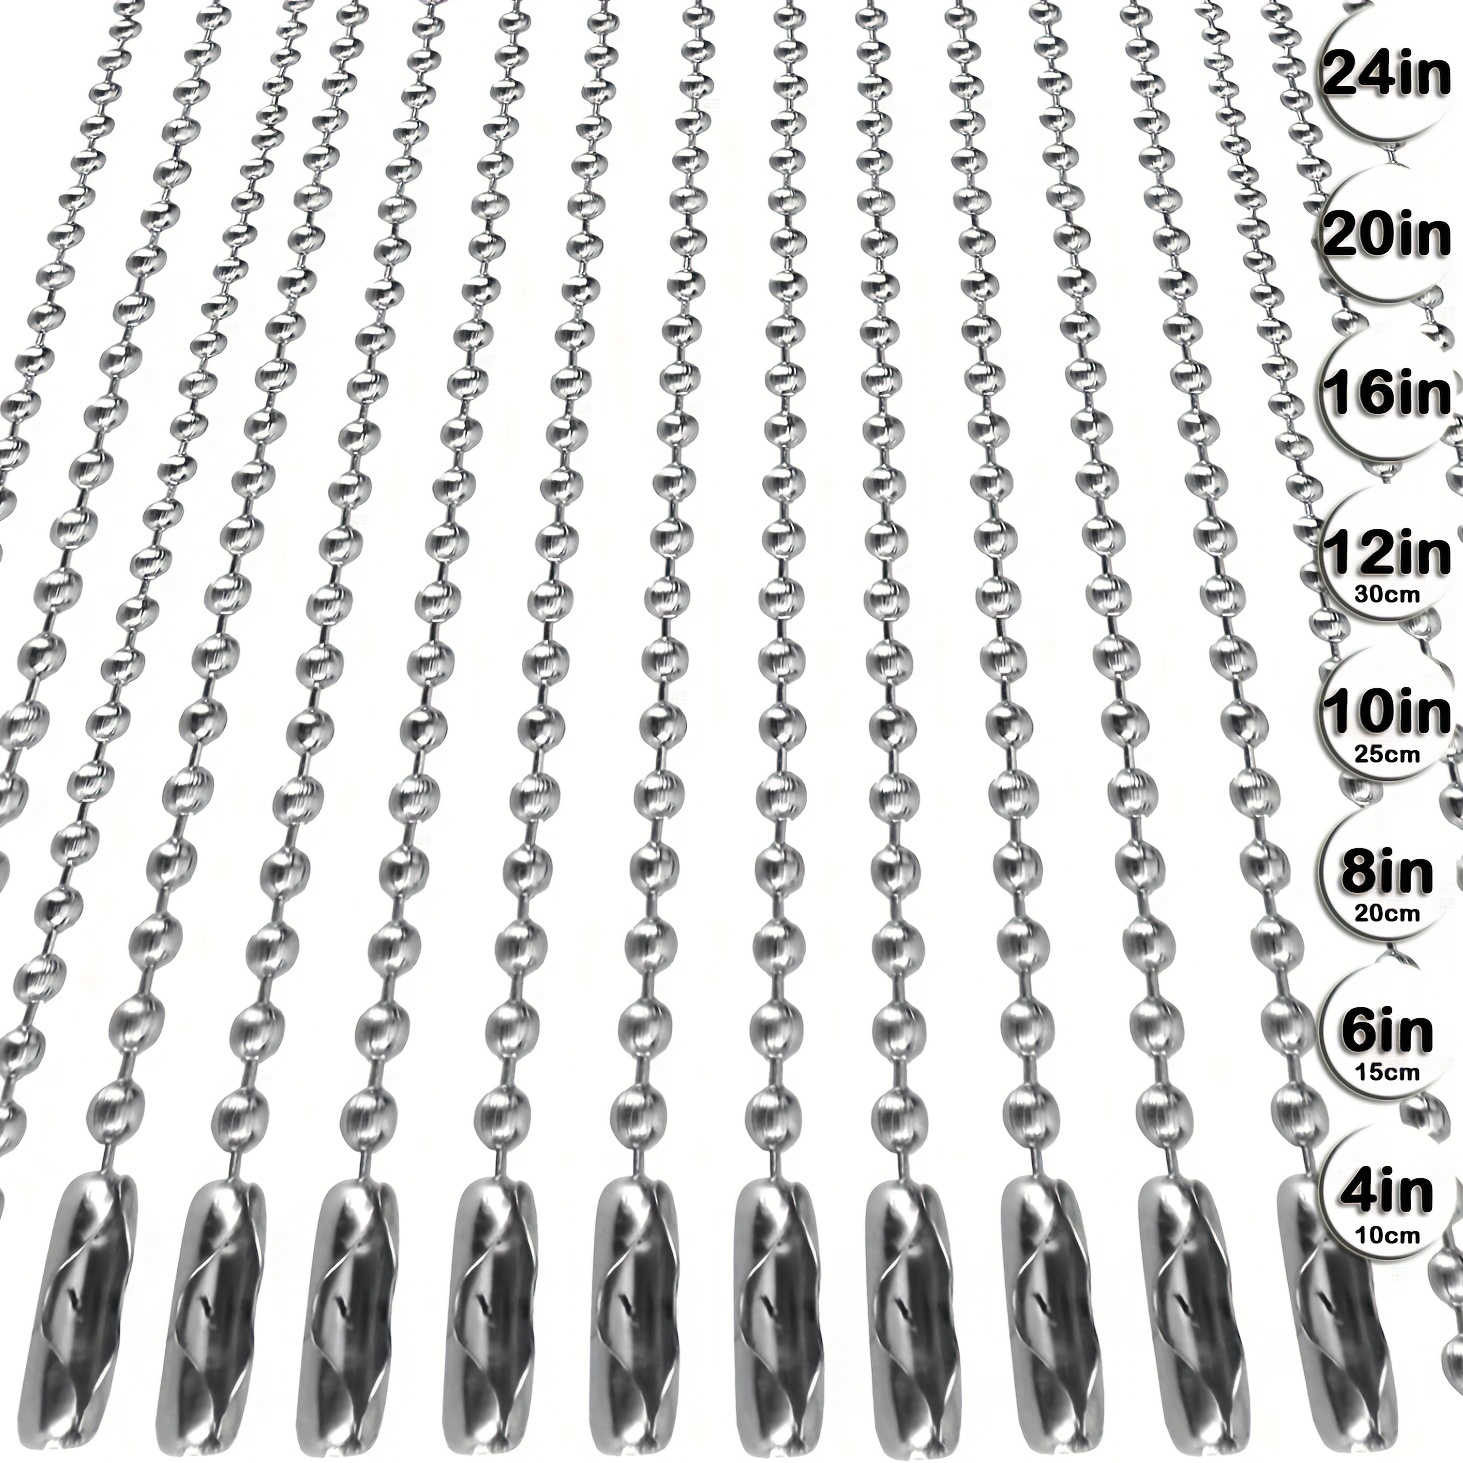 60pcs Black Necklace Cord with Clasp 1.5mm Bulk Necklace String for Bracelet Necklaces Pendants Jewelry Making Accessories(20 Inches)